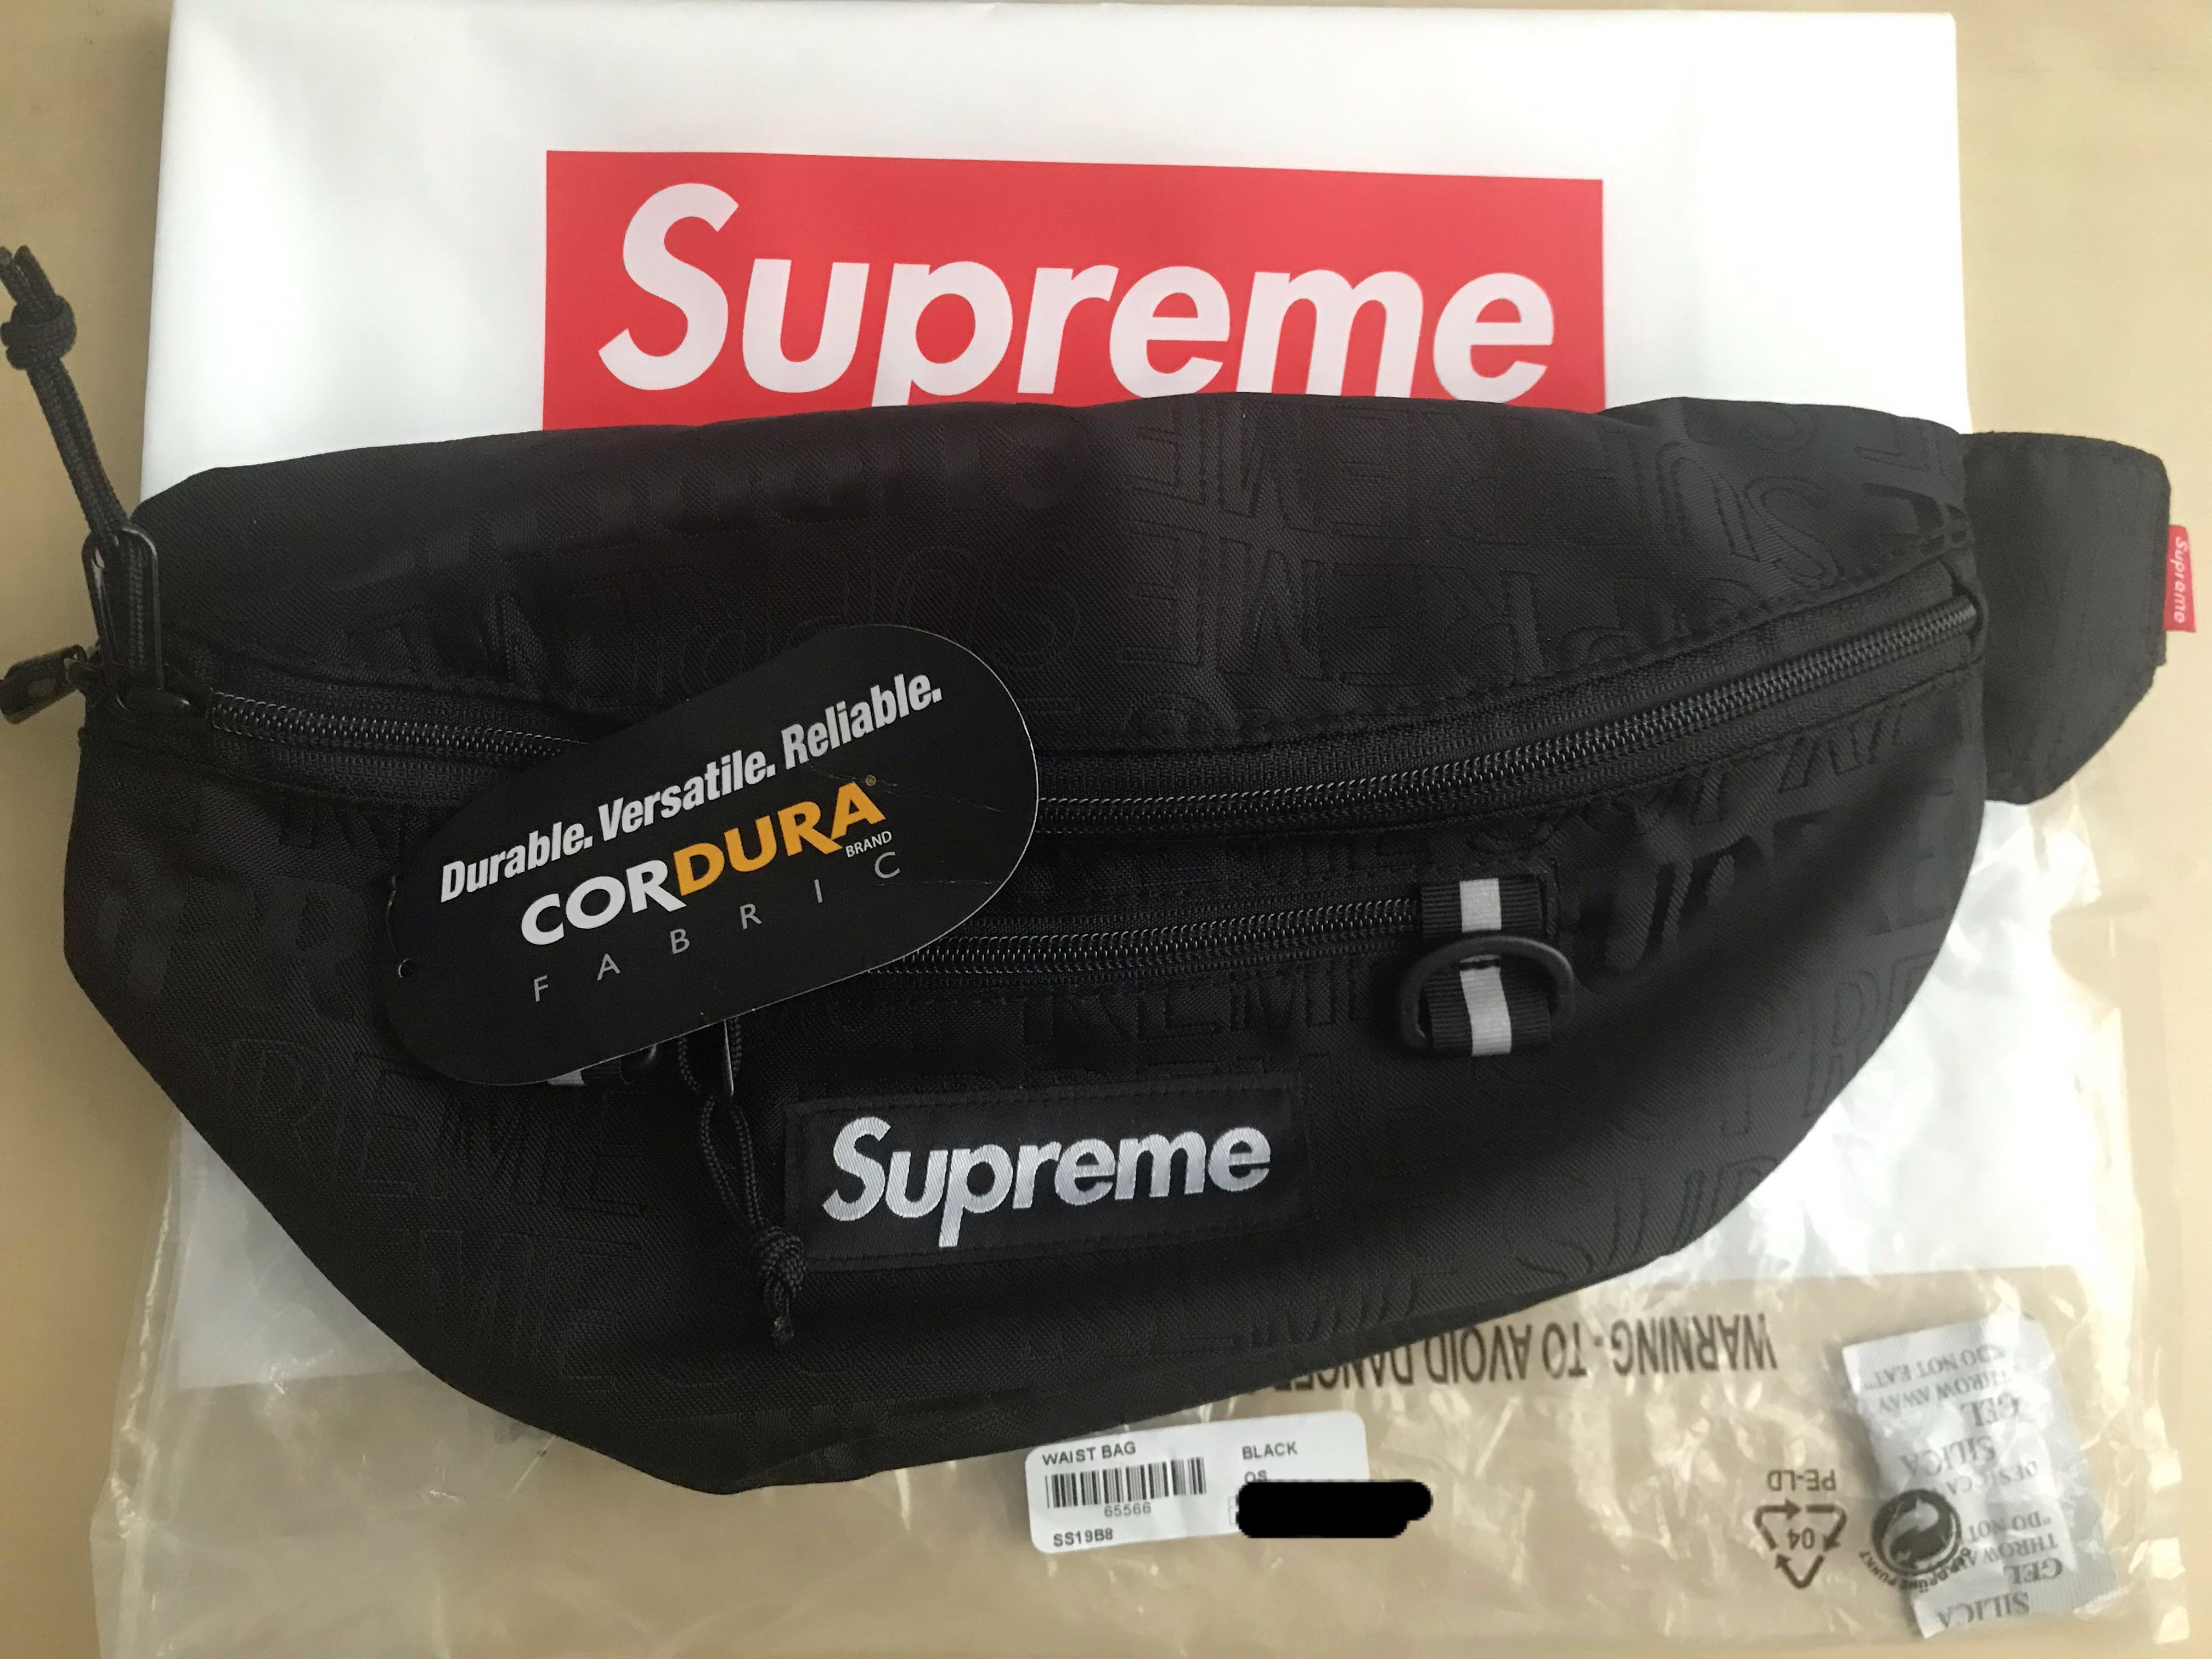 Supreme SS19 Backpack Review + Shower Cap 